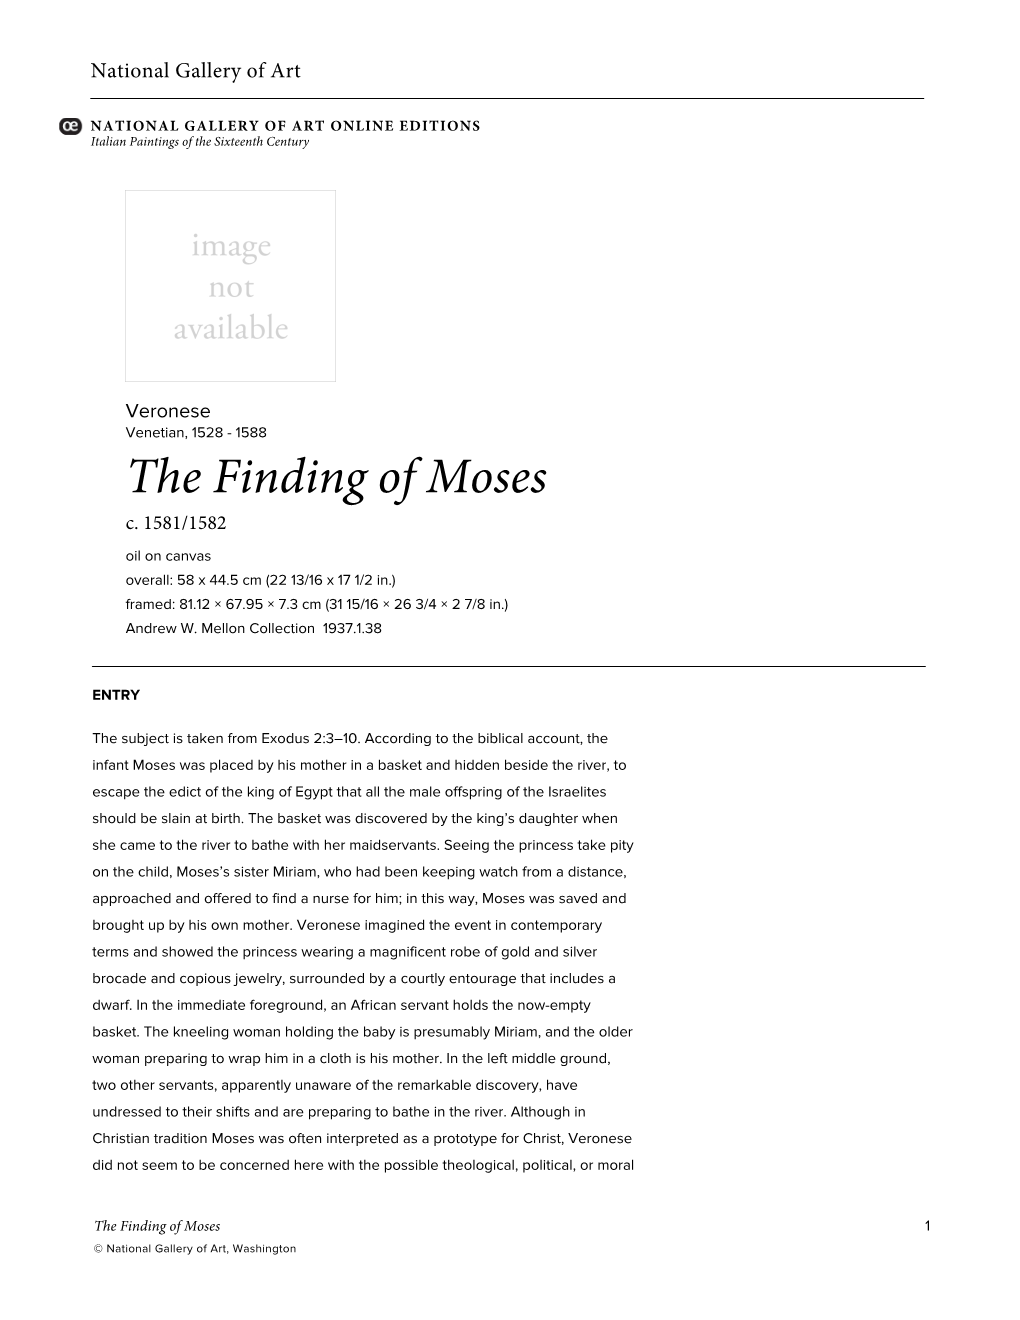 The Finding of Moses C